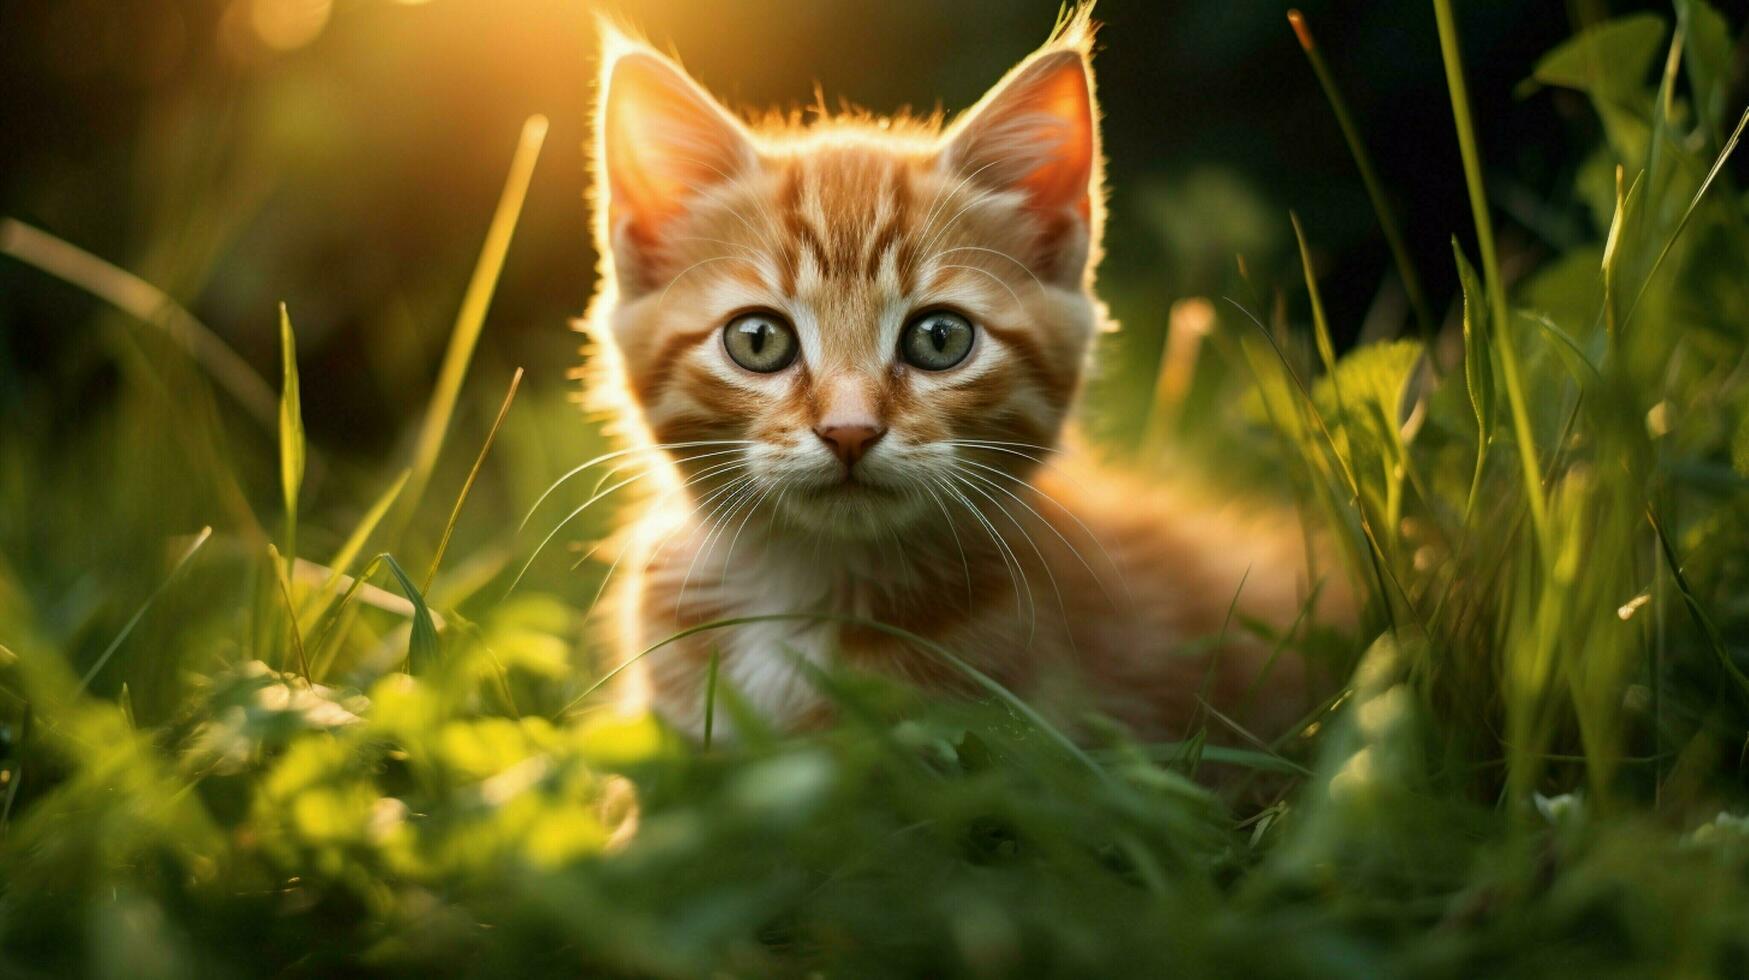 a cute kitten sitting in the grass staring playfully photo